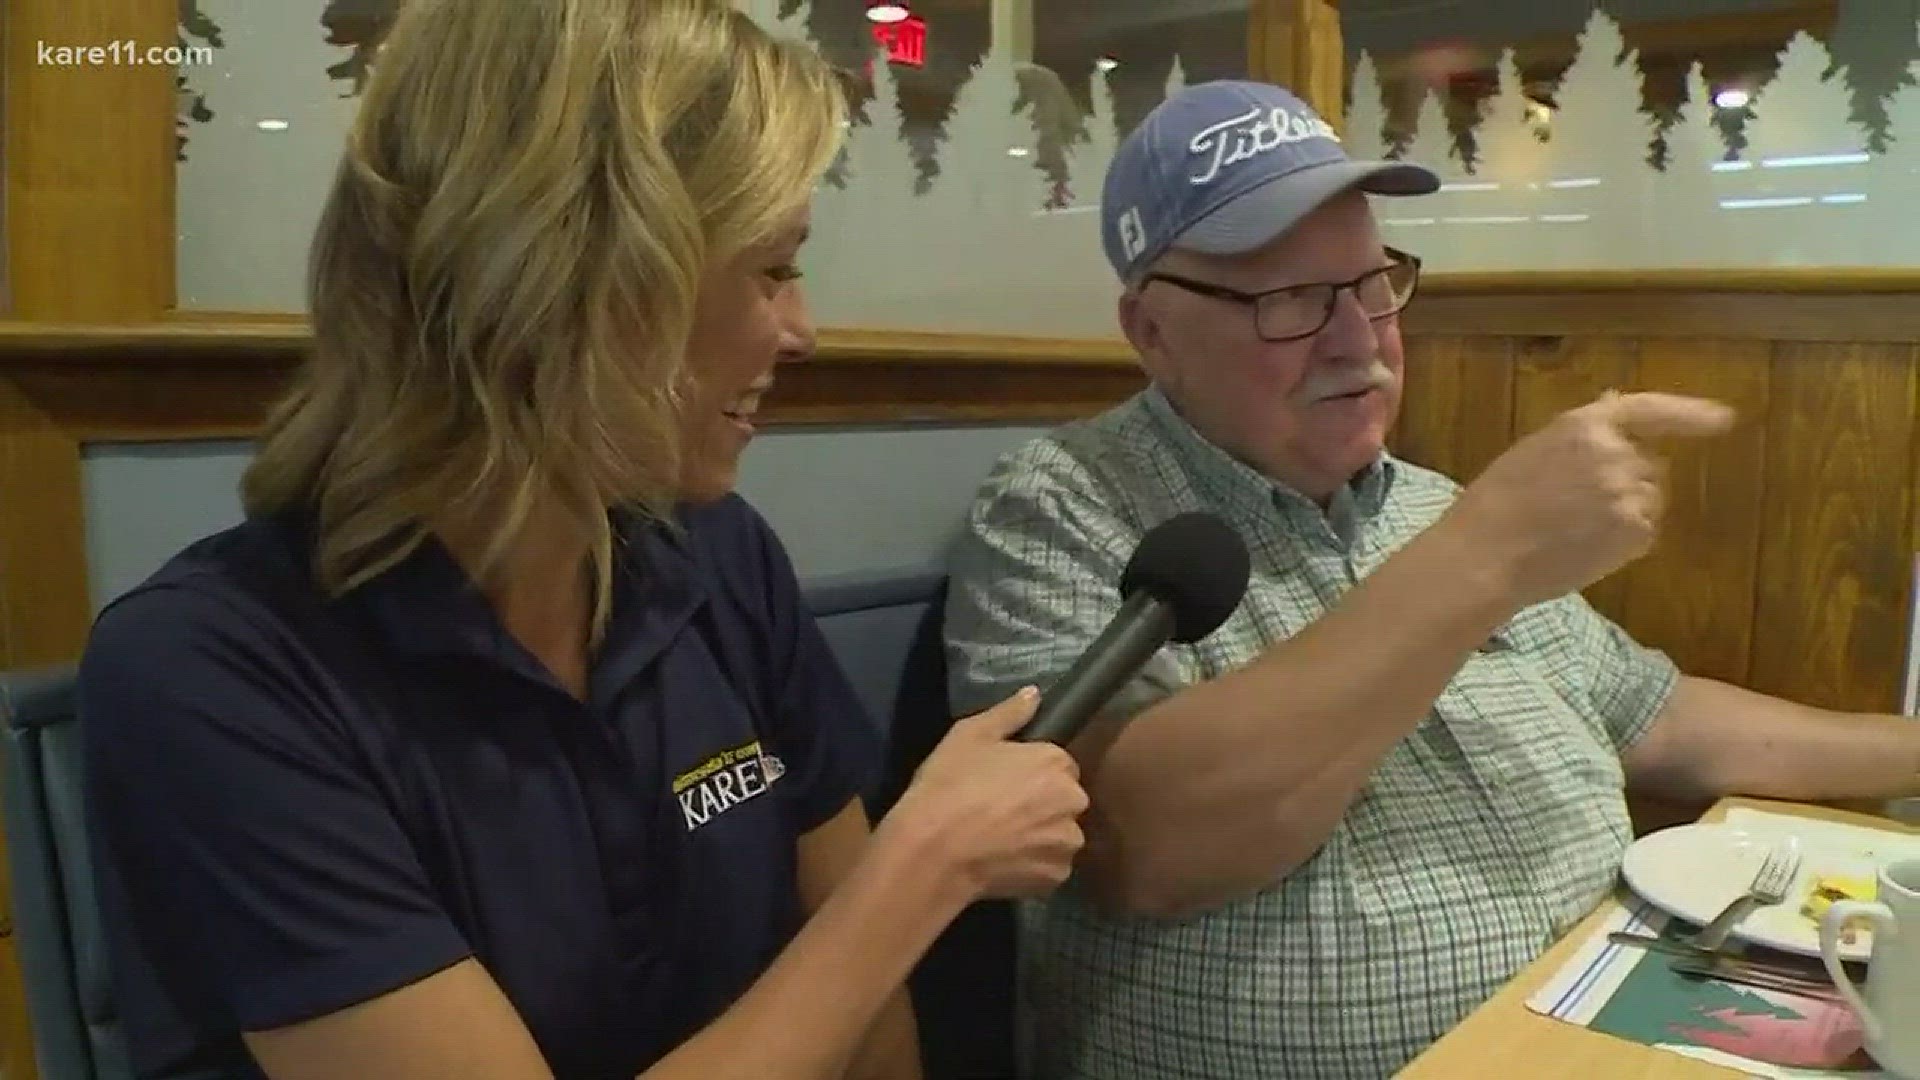 There are a lot of "regulars" at the North Pole Restaurant in Newport. We chatted with a few during our trip there for Sunny Side Up! https://kare11.tv/2CS8iH2